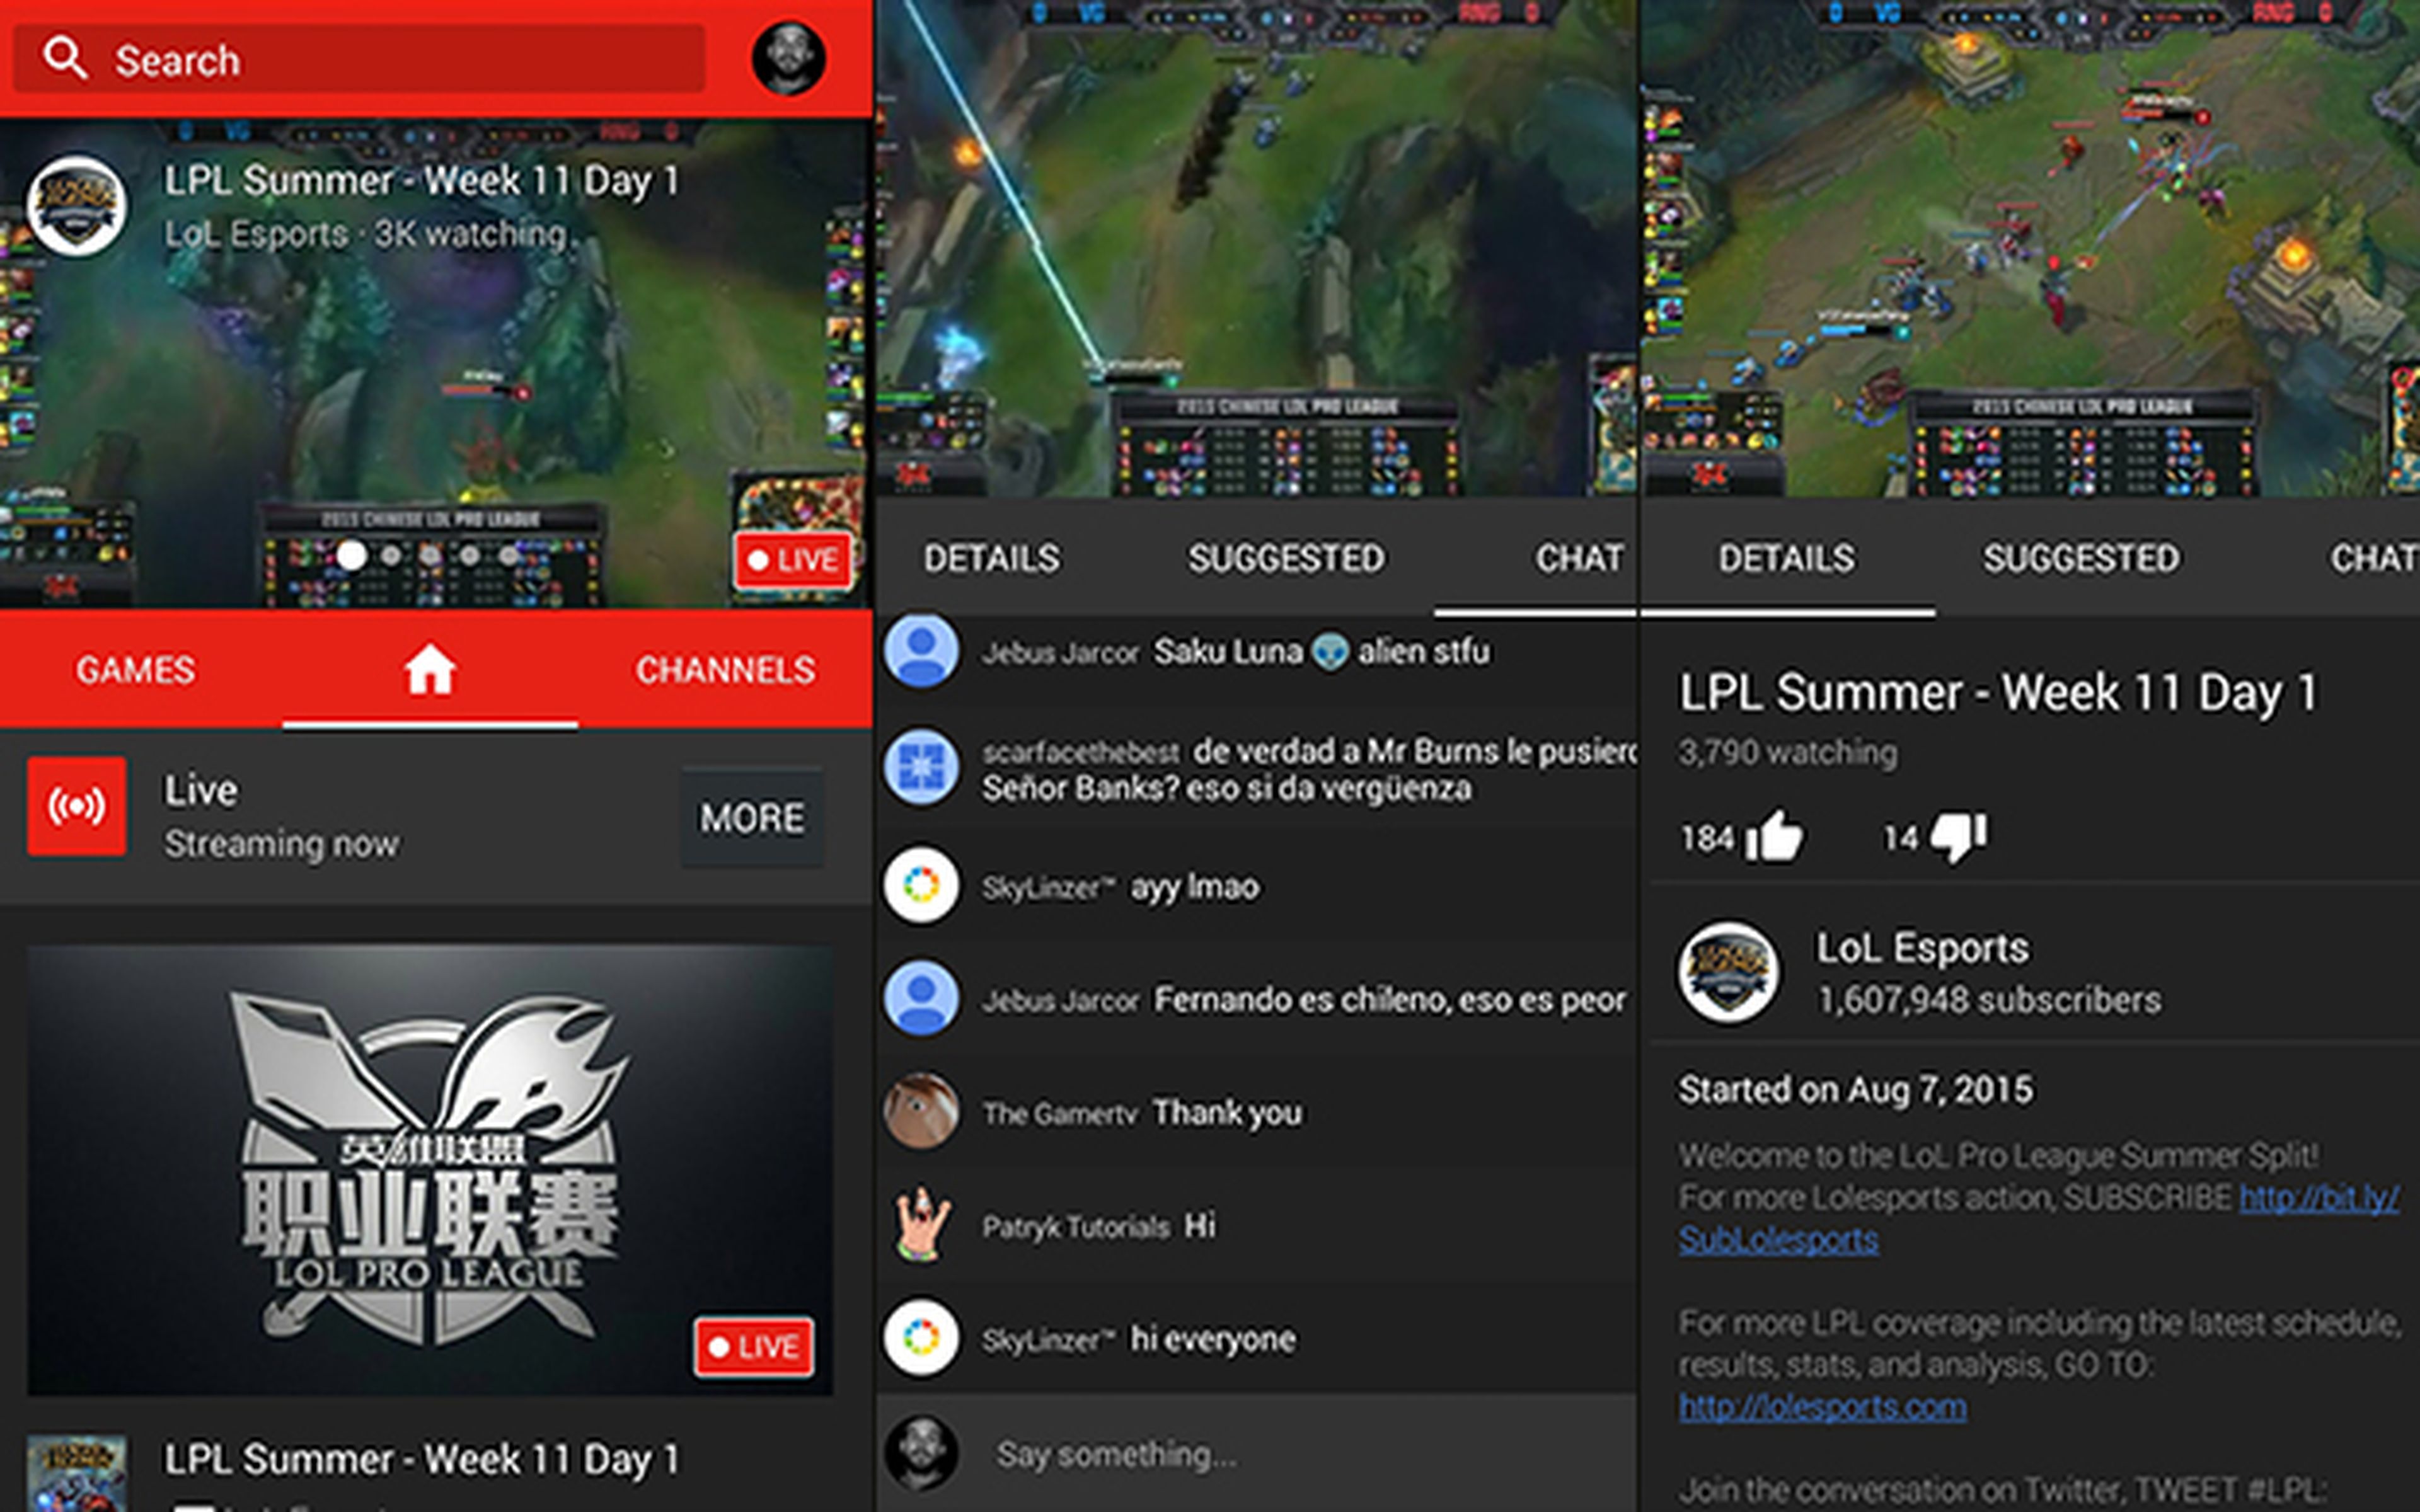 Youtube Gaming llega a Android para hacer frente a Twitch